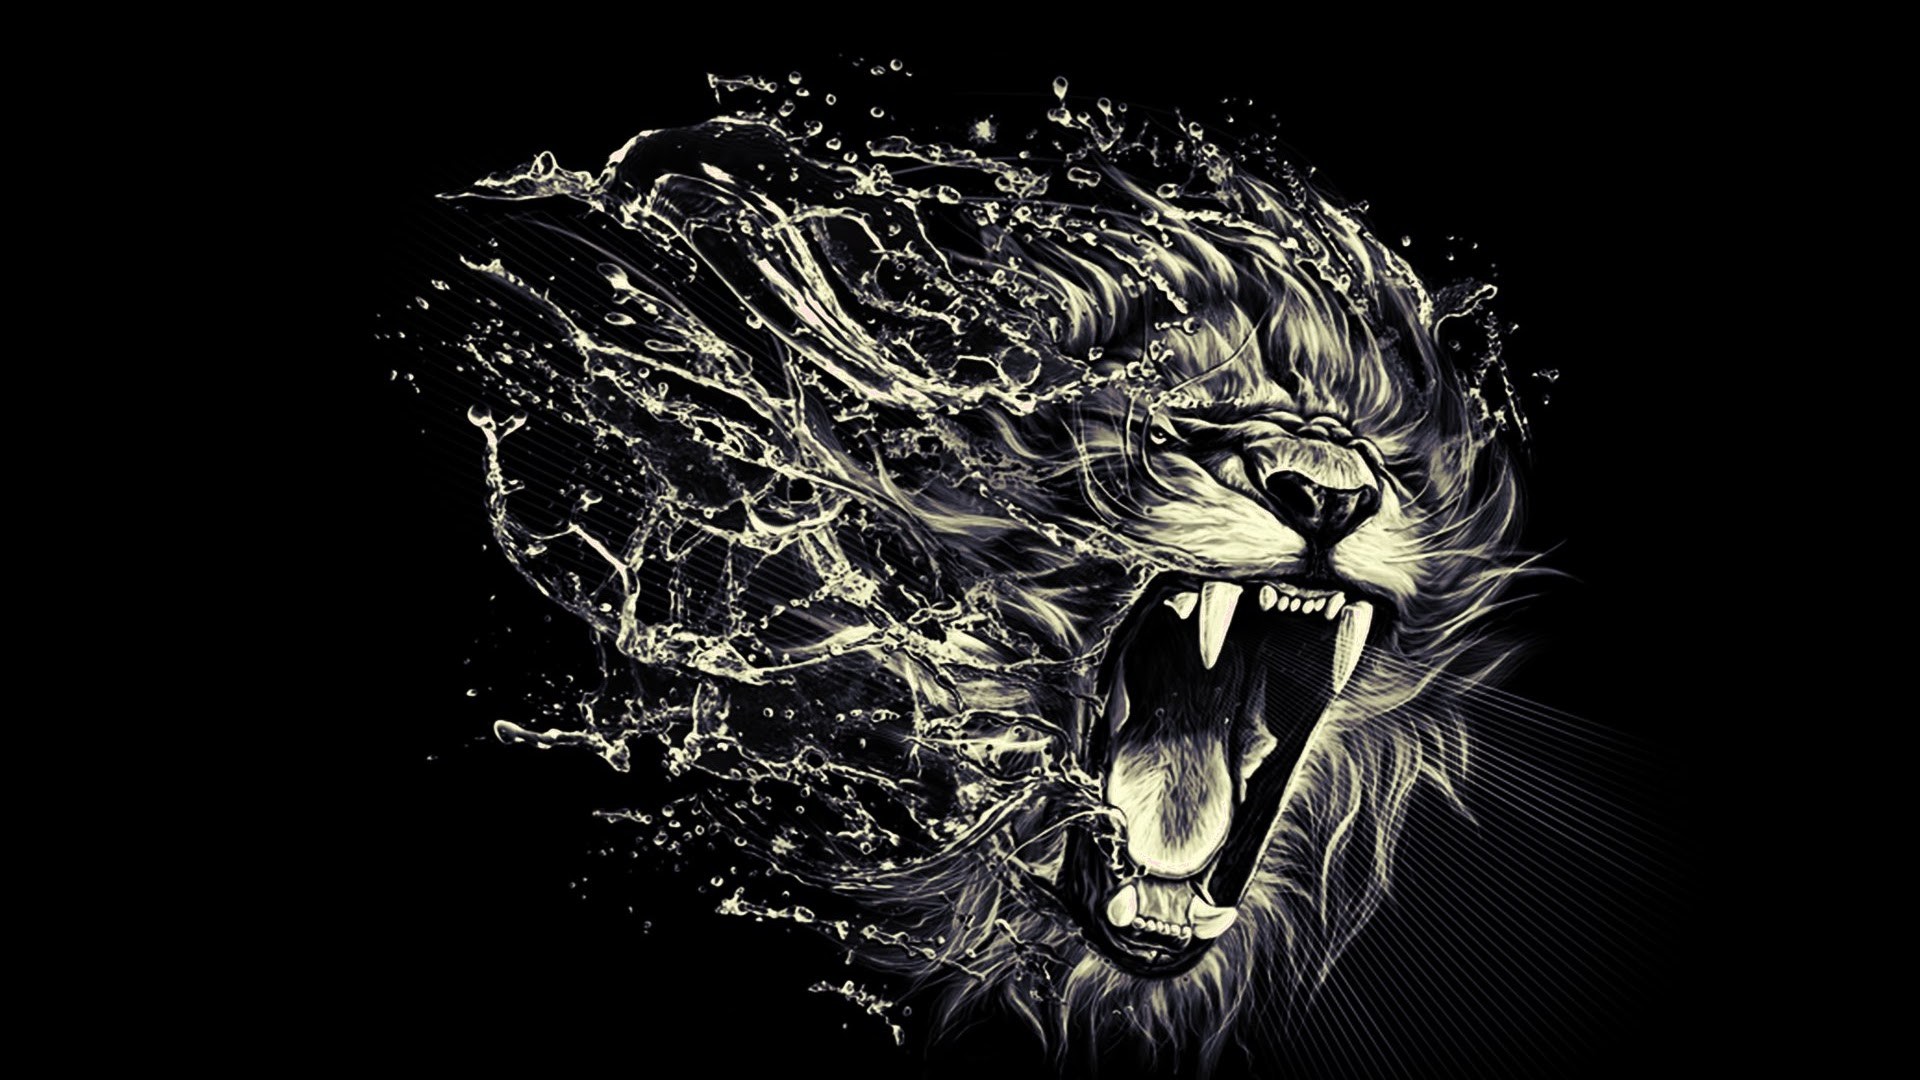 Best 25+ Lion hd wallpaper ideas on Pinterest | Lion images, Lion tattoo  images and Pretty phone wallpaper